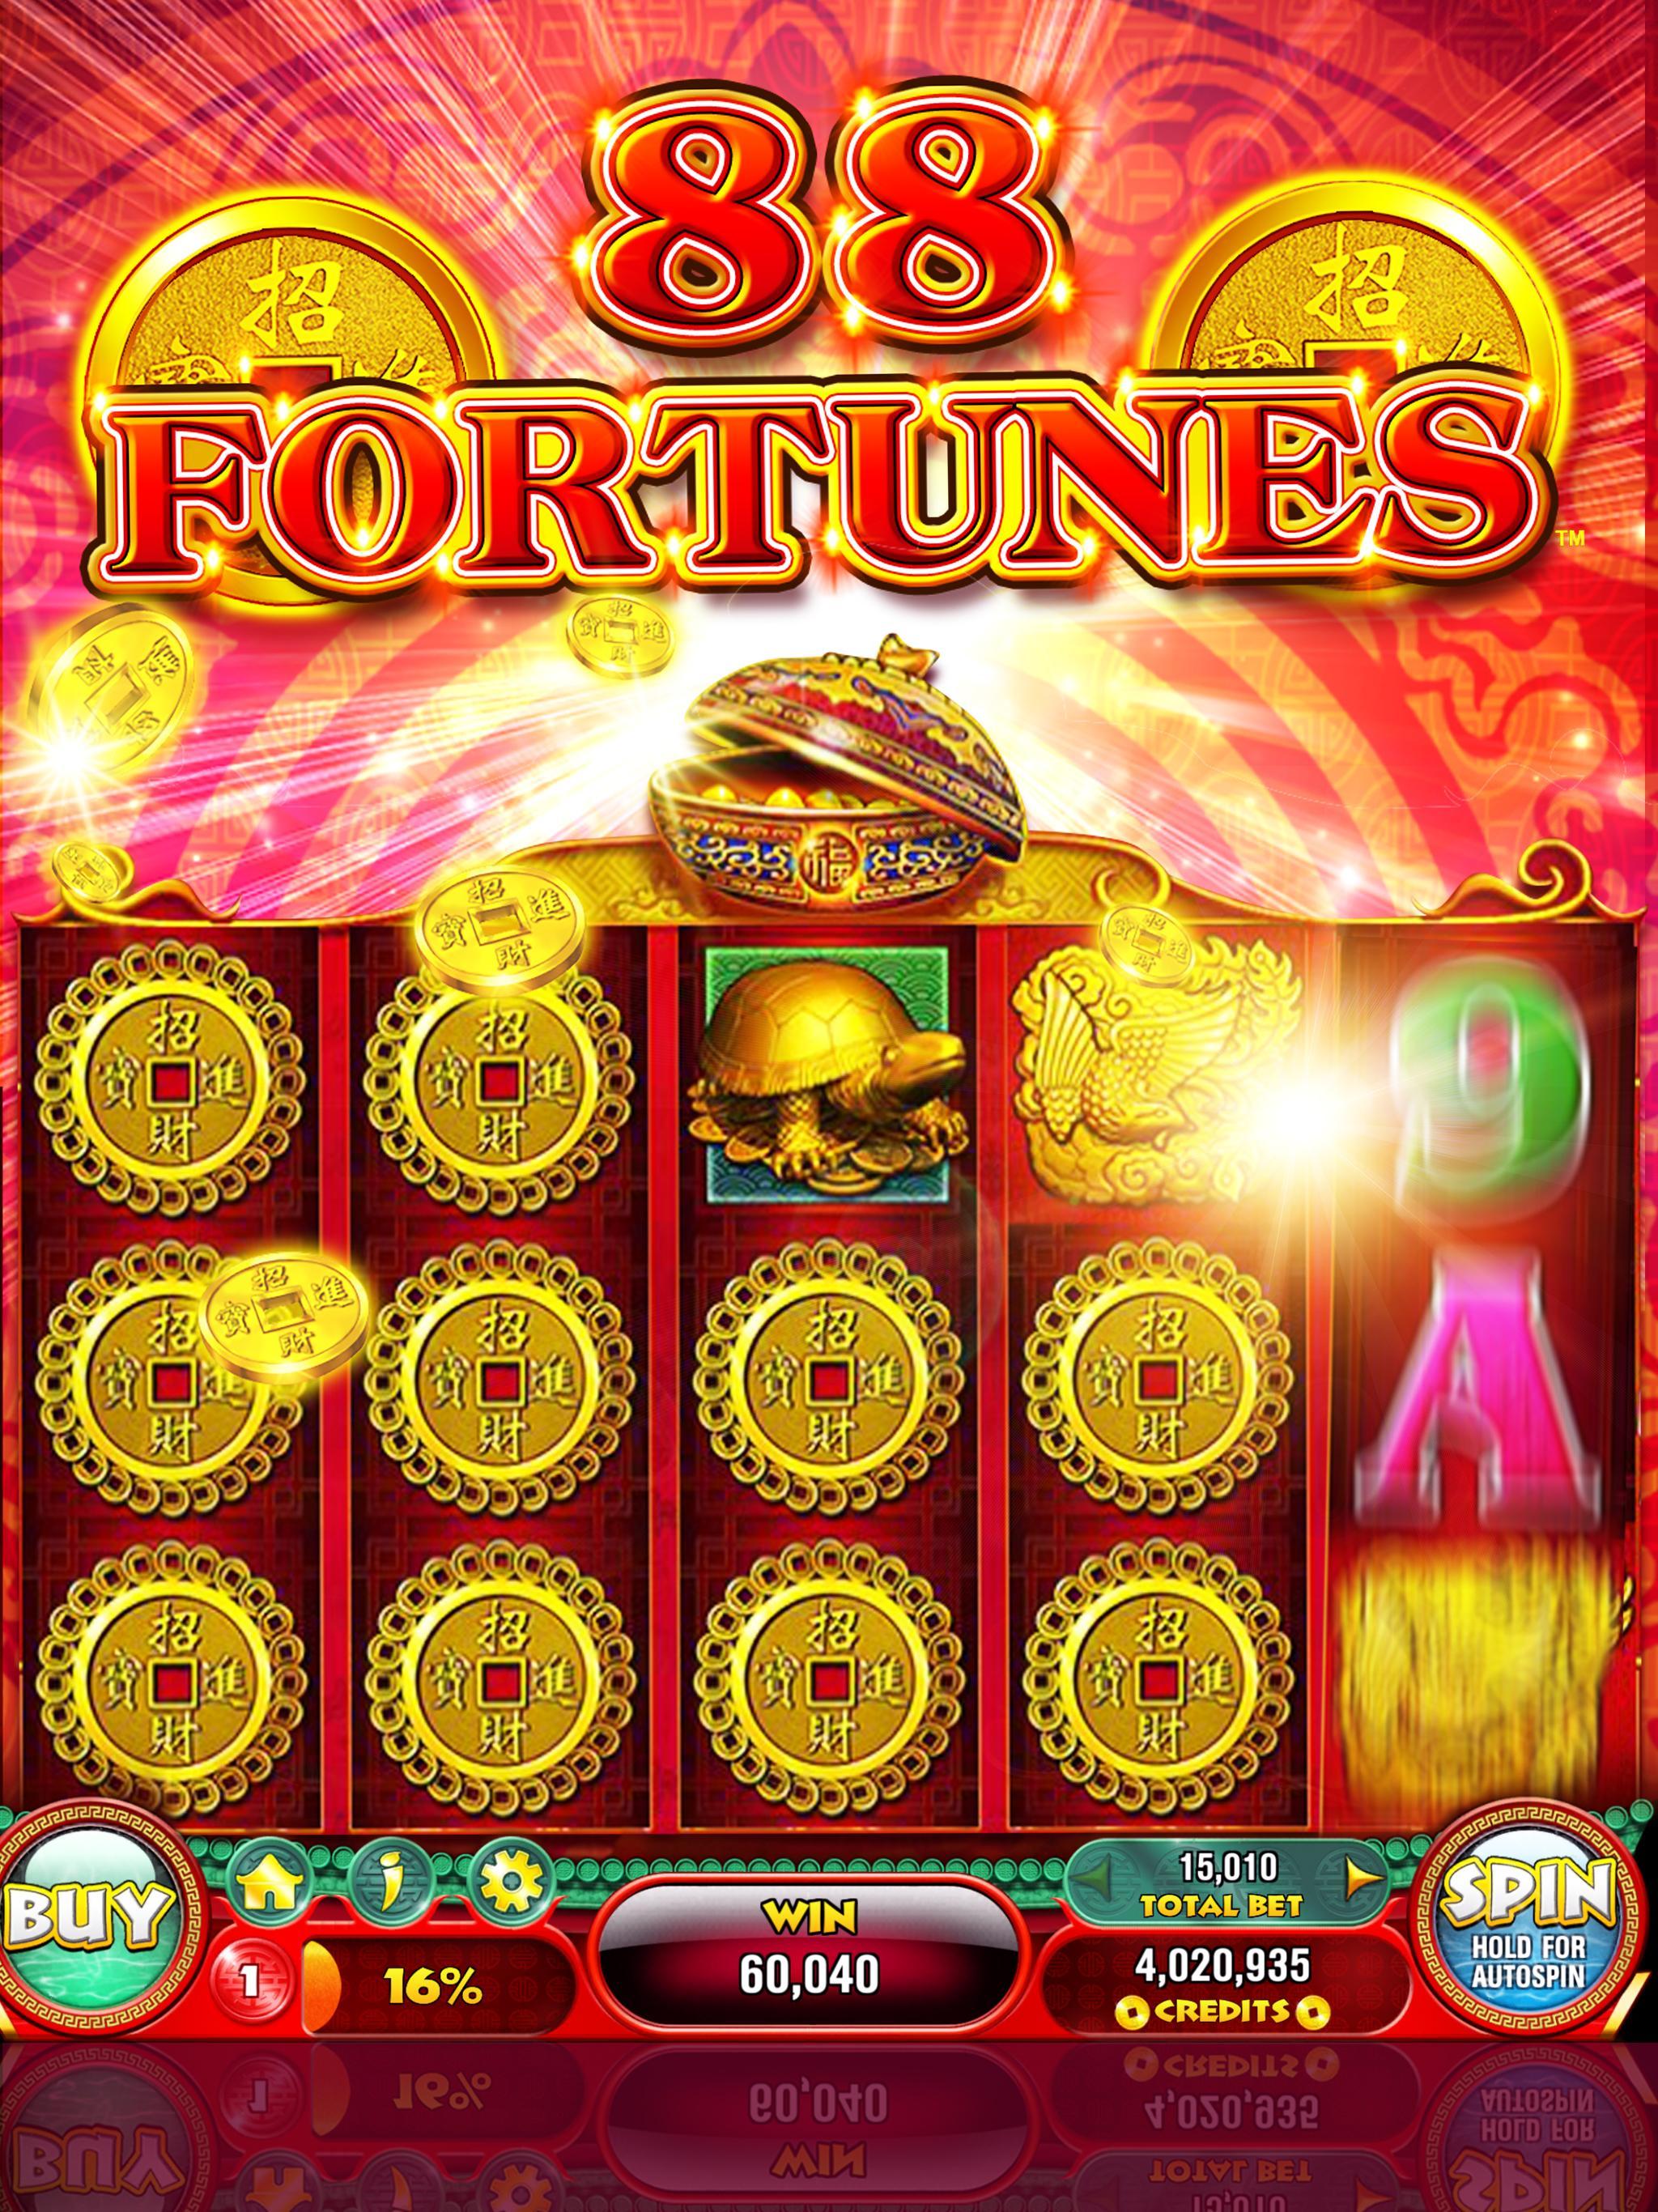 88 fortunes slot game